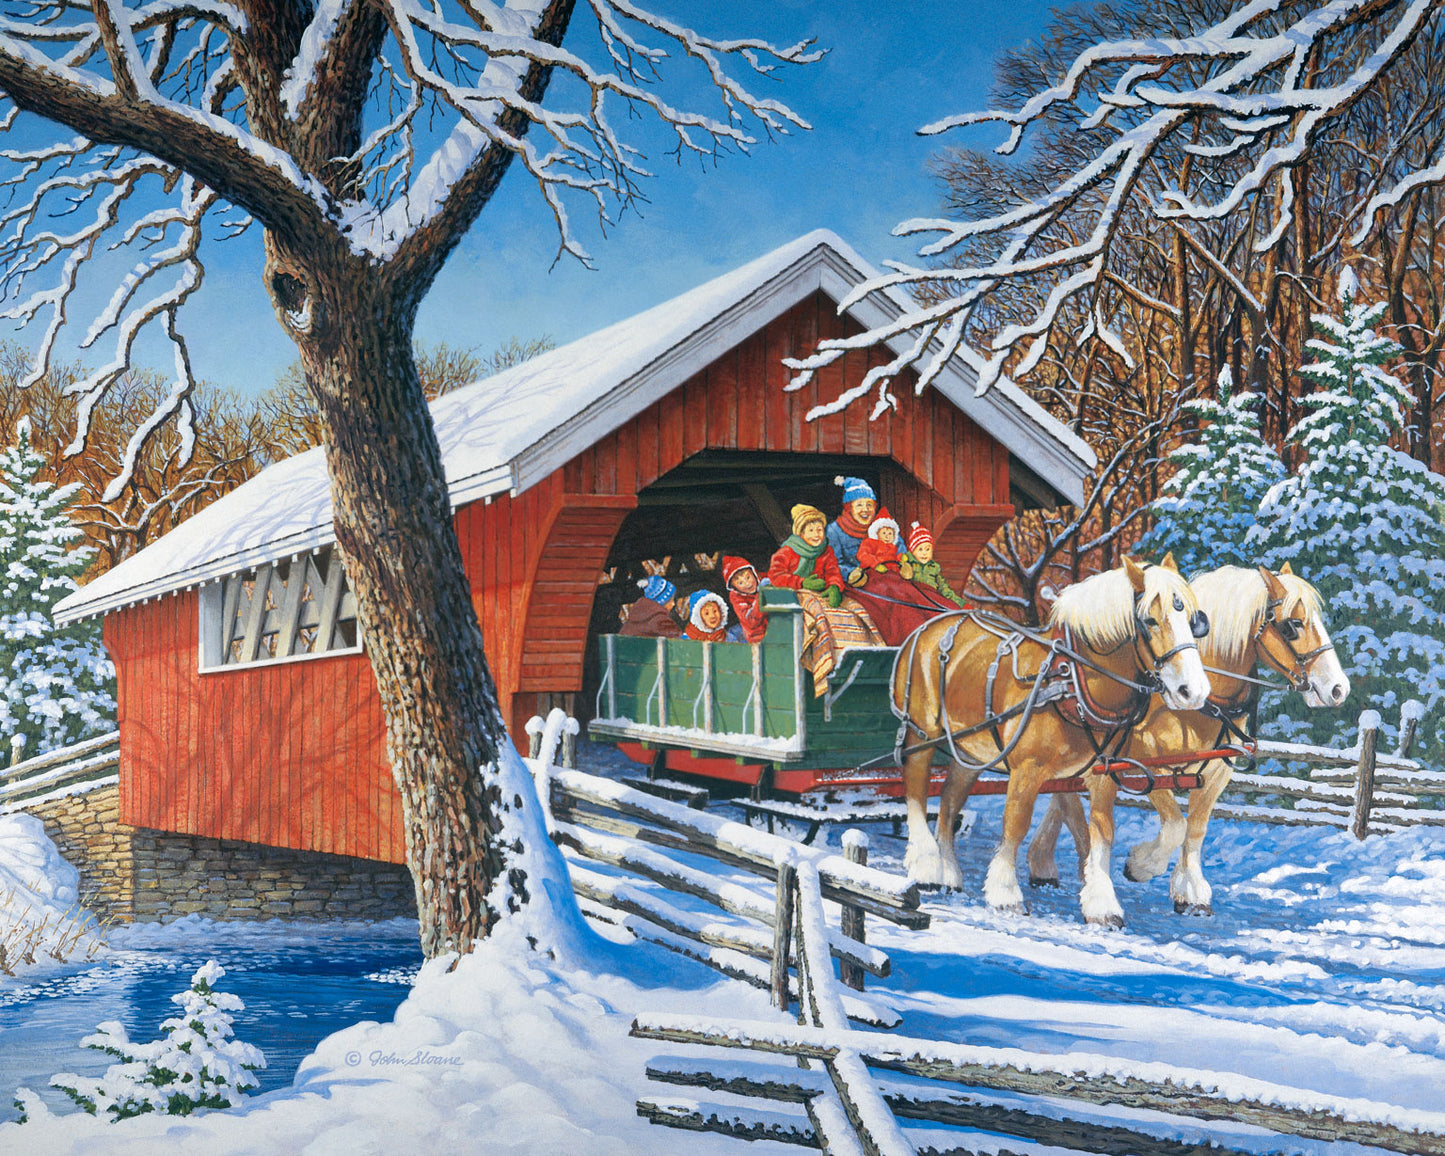 Sleigh Ride - Puzzle by John Sloane